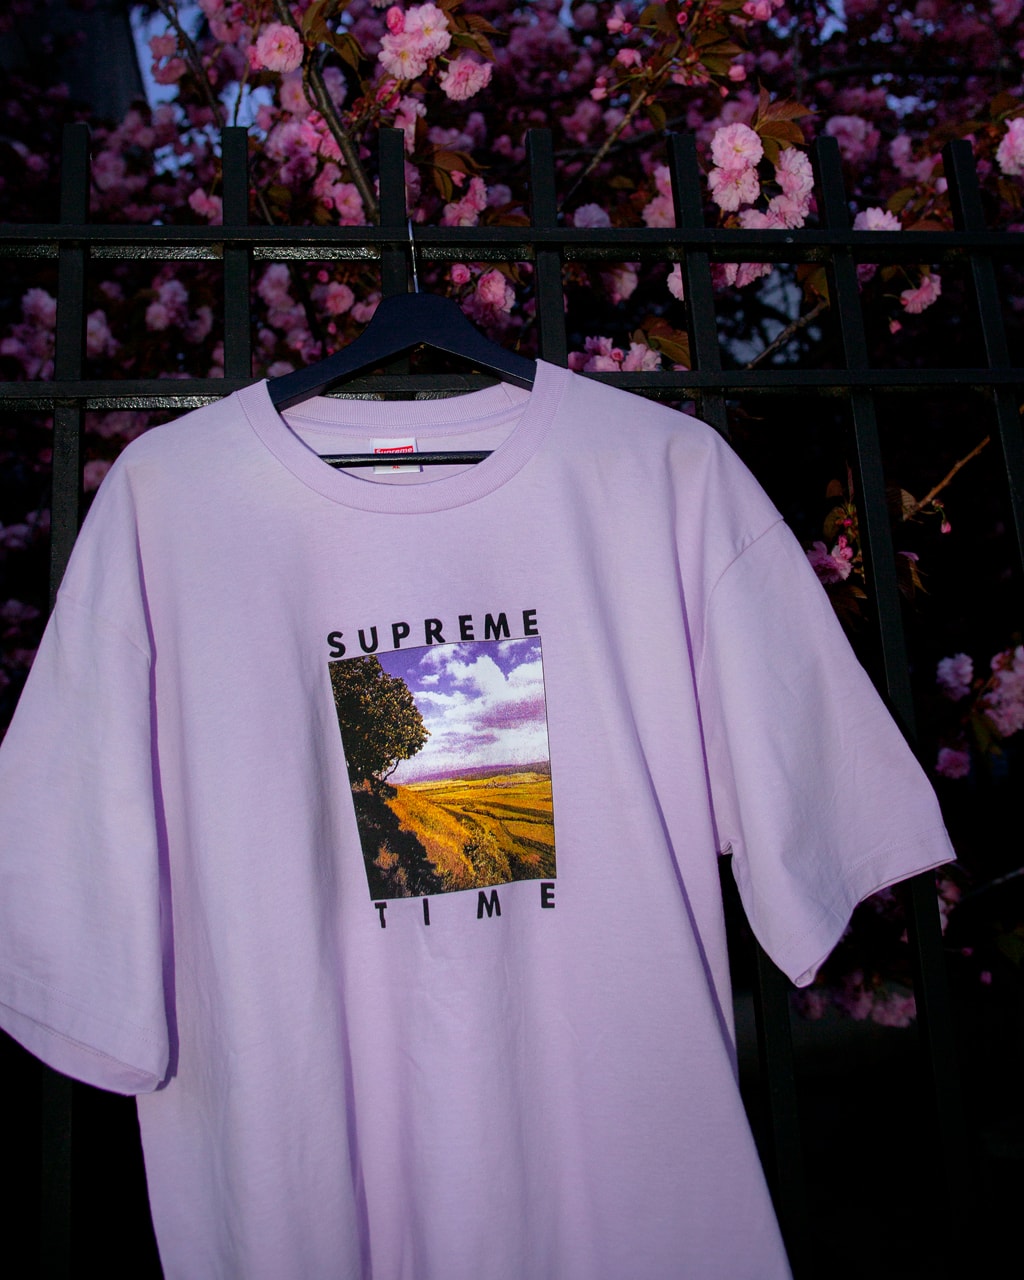 Supreme Spring 2020 T Shirts And Tees Hypebeast - t shirt supreme logo hoodie clothing t shirt supreme roblox 8oh1m image provided epicentro festival